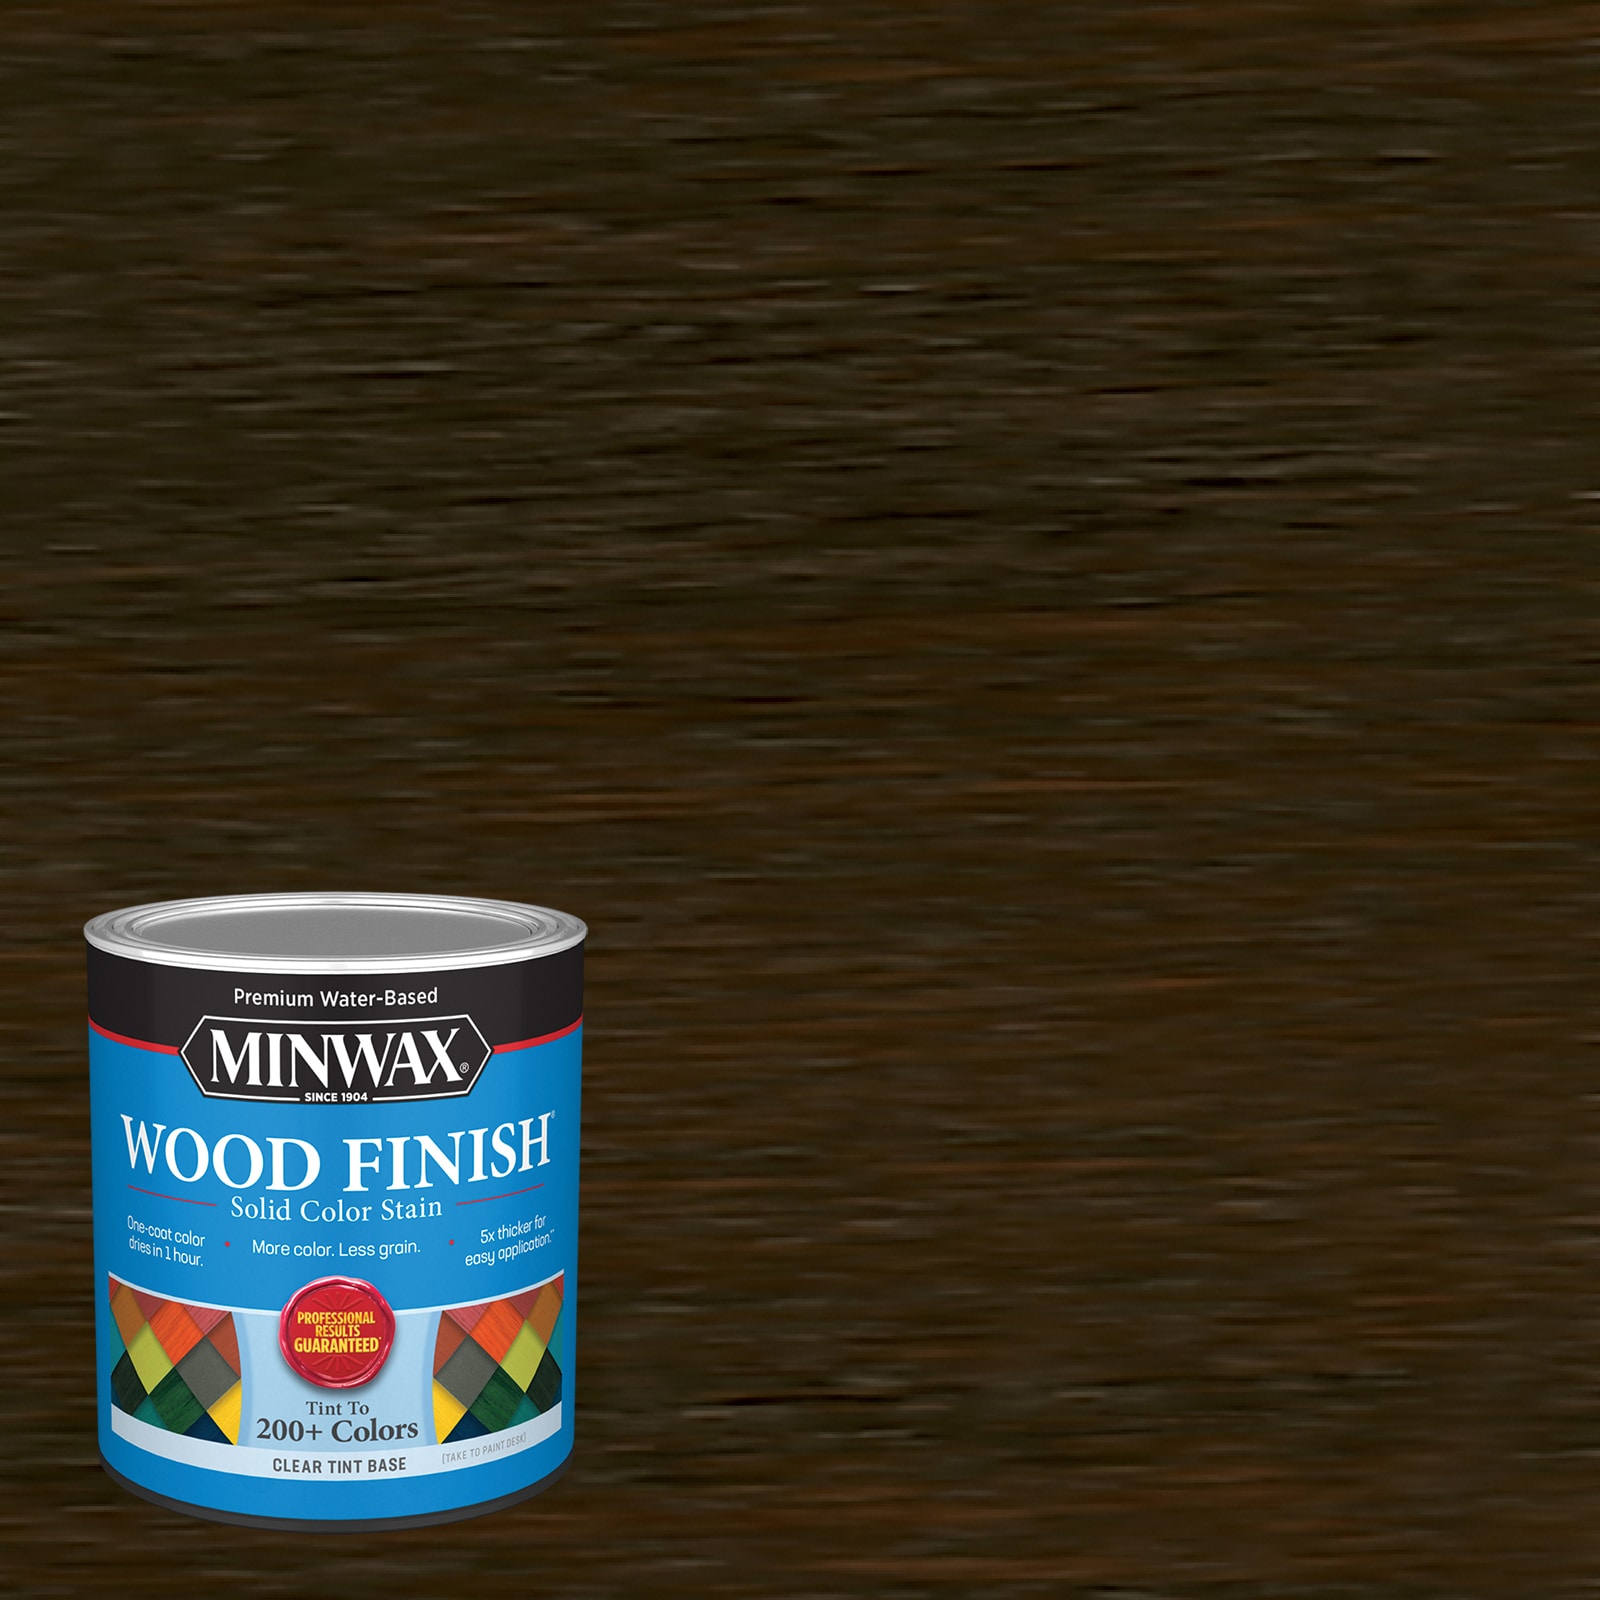 Minwax Wood Finish Water-Based Mocha Mw1116 Interior Stains the Sumatra Interior (1-Quart) at Solid in Stain department